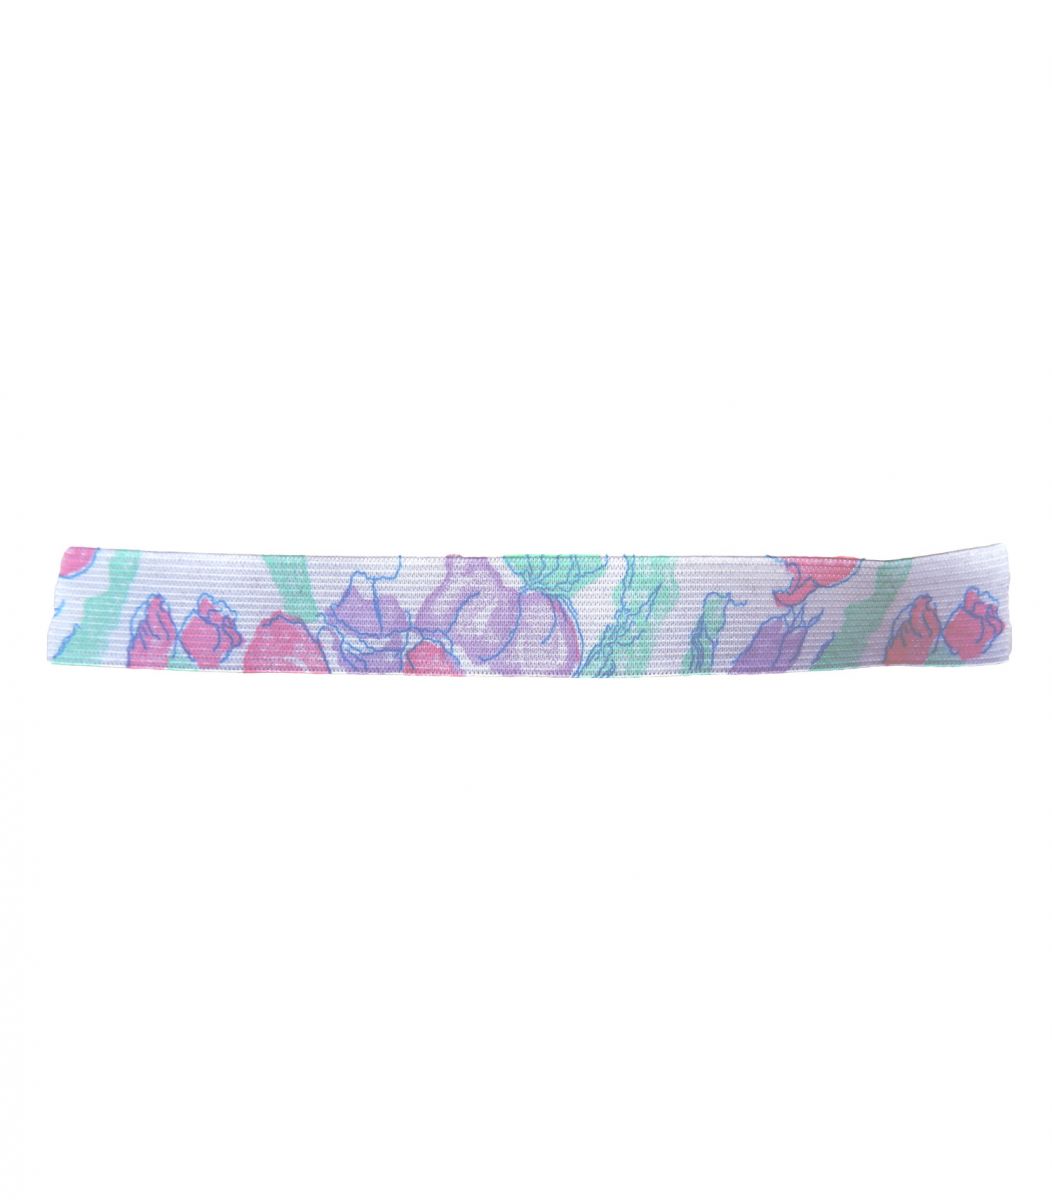  Rubber Band  Rubber Band Colorful 20mm Rub20c-1